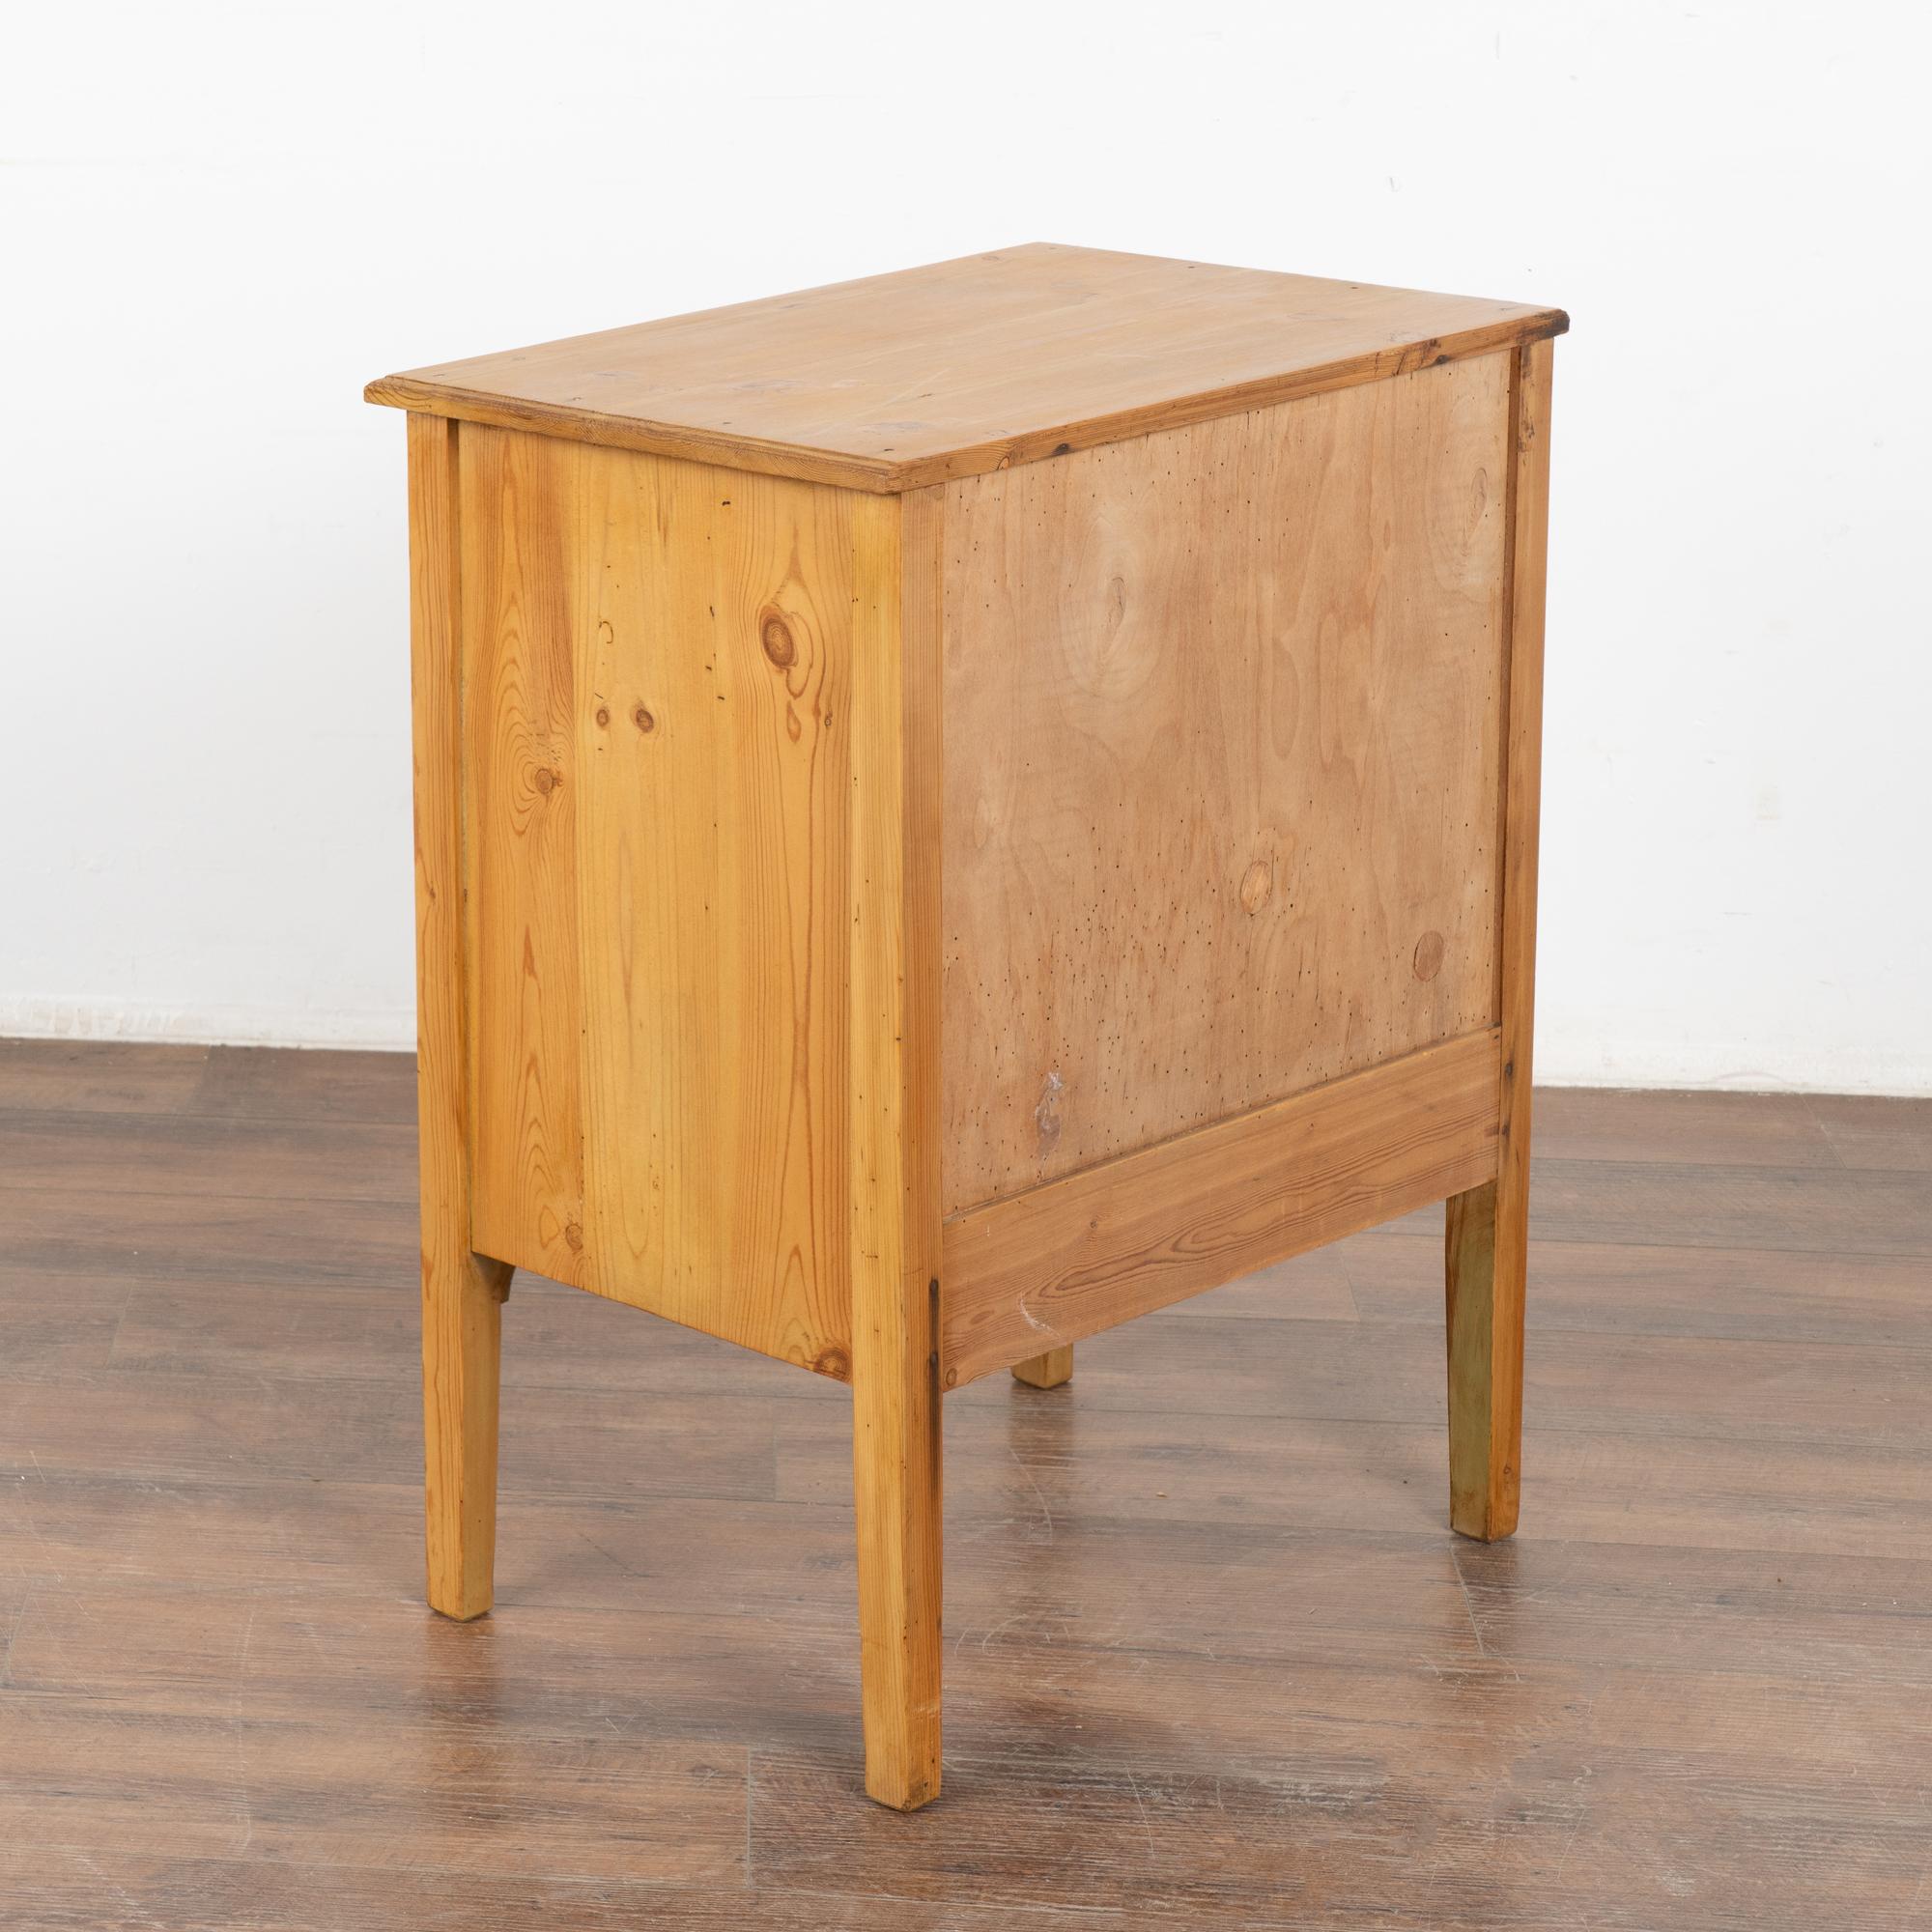 Vintage Pine Small Chest of Drawers Nightstand, Denmark circa 1940 For Sale 4